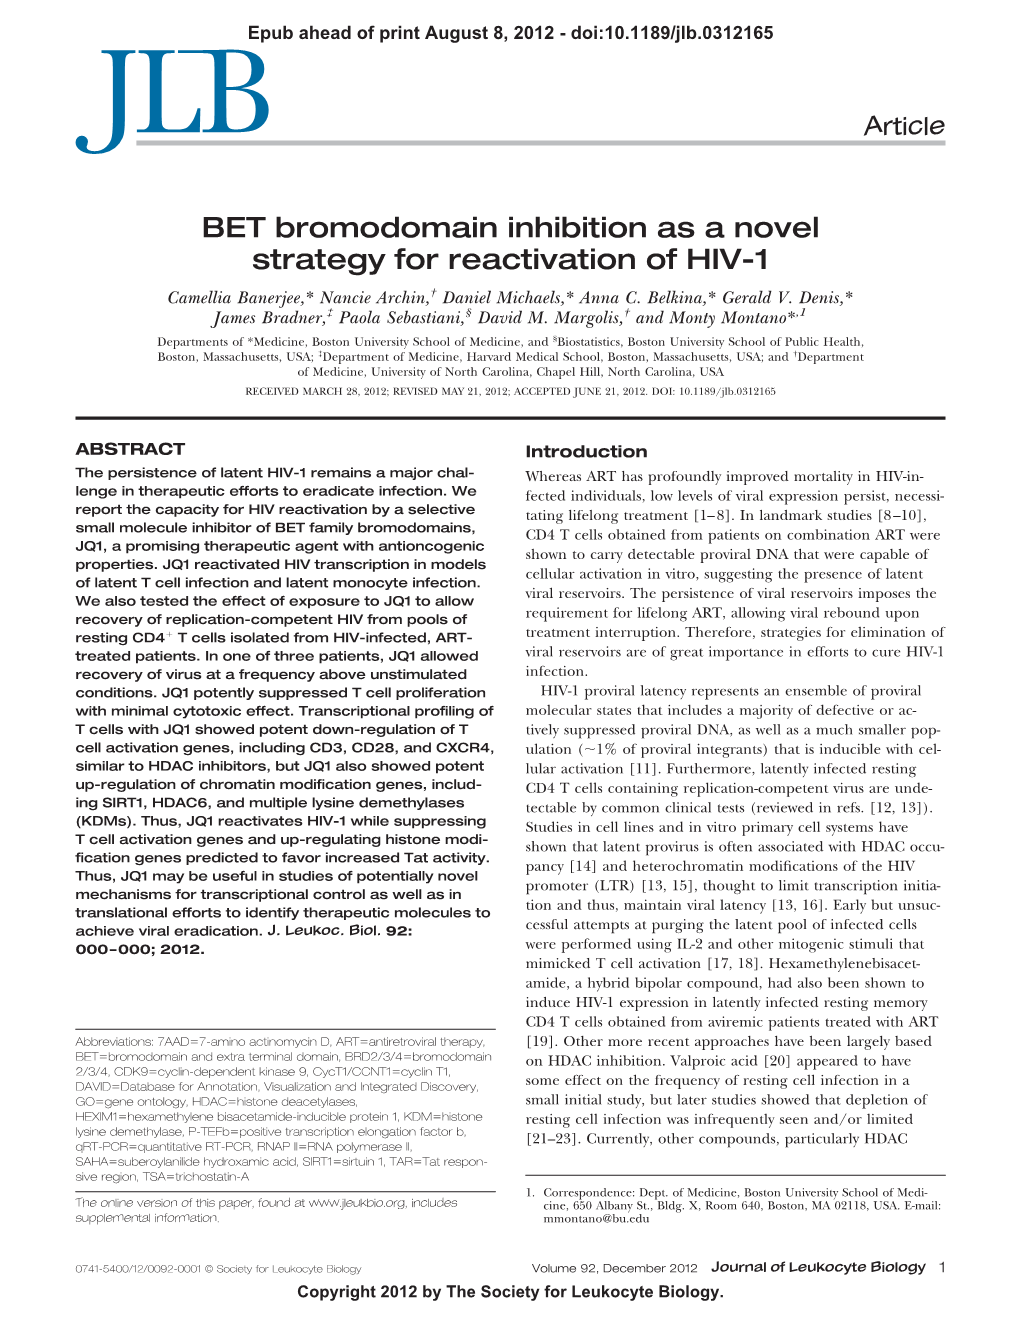 BET Bromodomain Inhibition As a Novel Strategy for Reactivation of HIV-1 Camellia Banerjee,* Nancie Archin,† Daniel Michaels,* Anna C